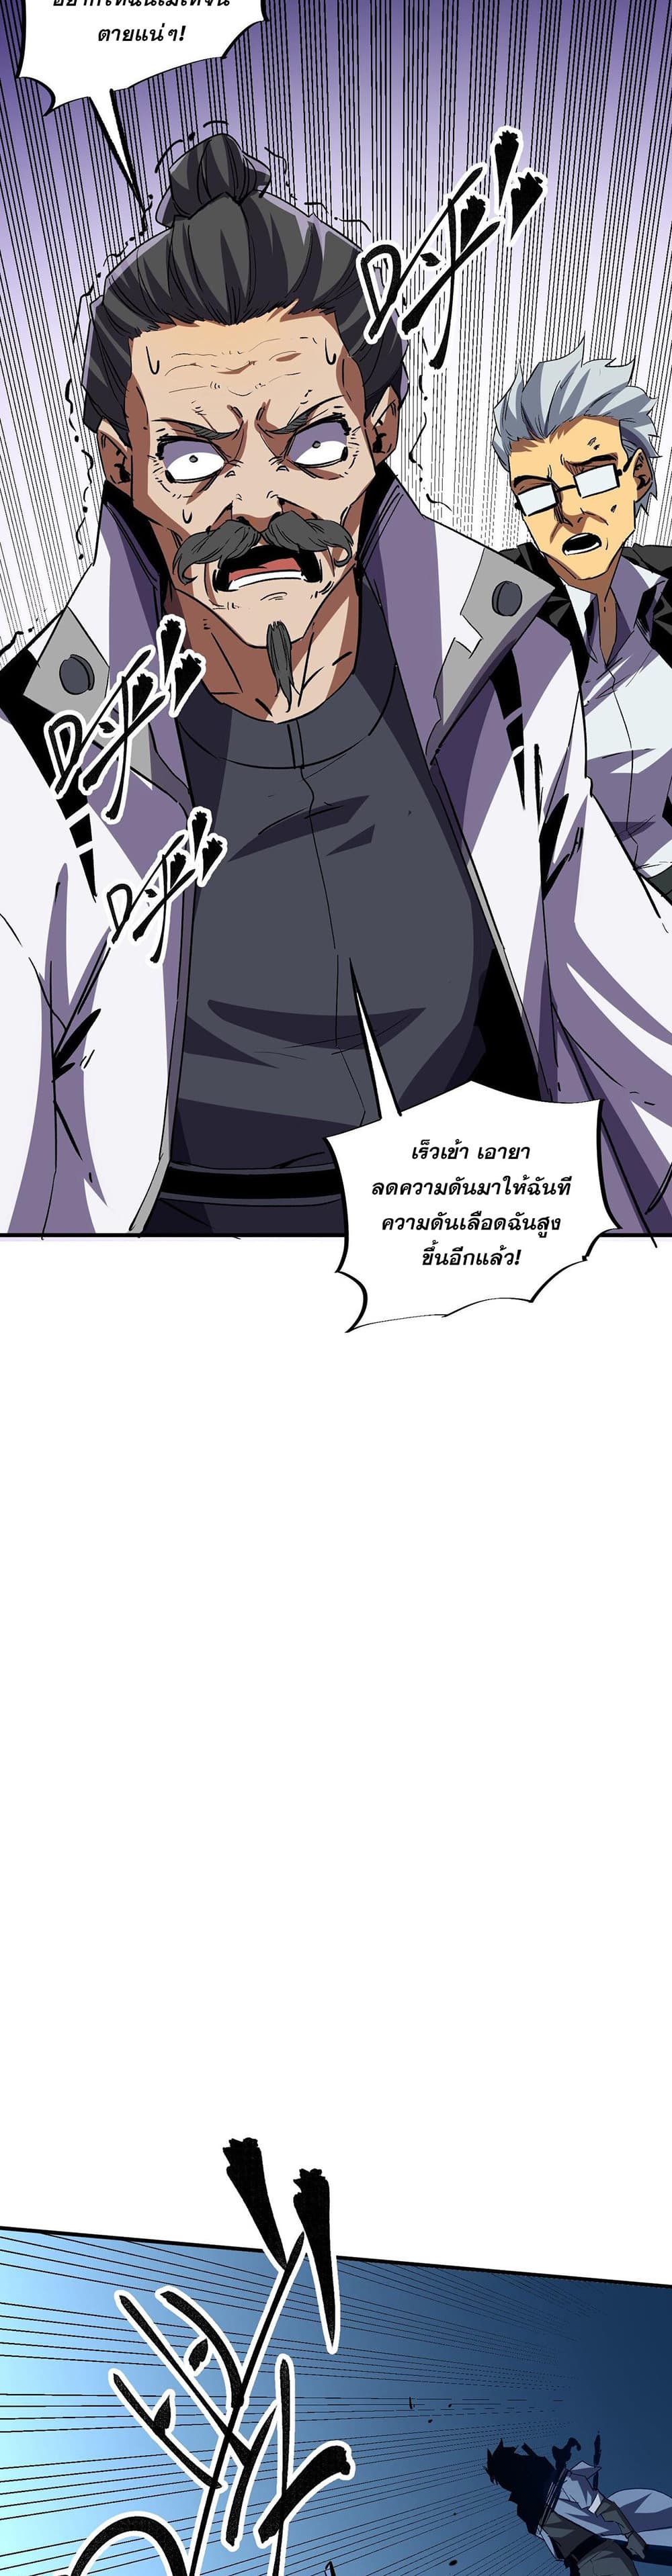 Job Changing for the Entire Population: The Jobless Me Will Terminate the Gods ฉันคือผู้เล่นไร้อาชีพที่สังหารเหล่าเทพ 6-6